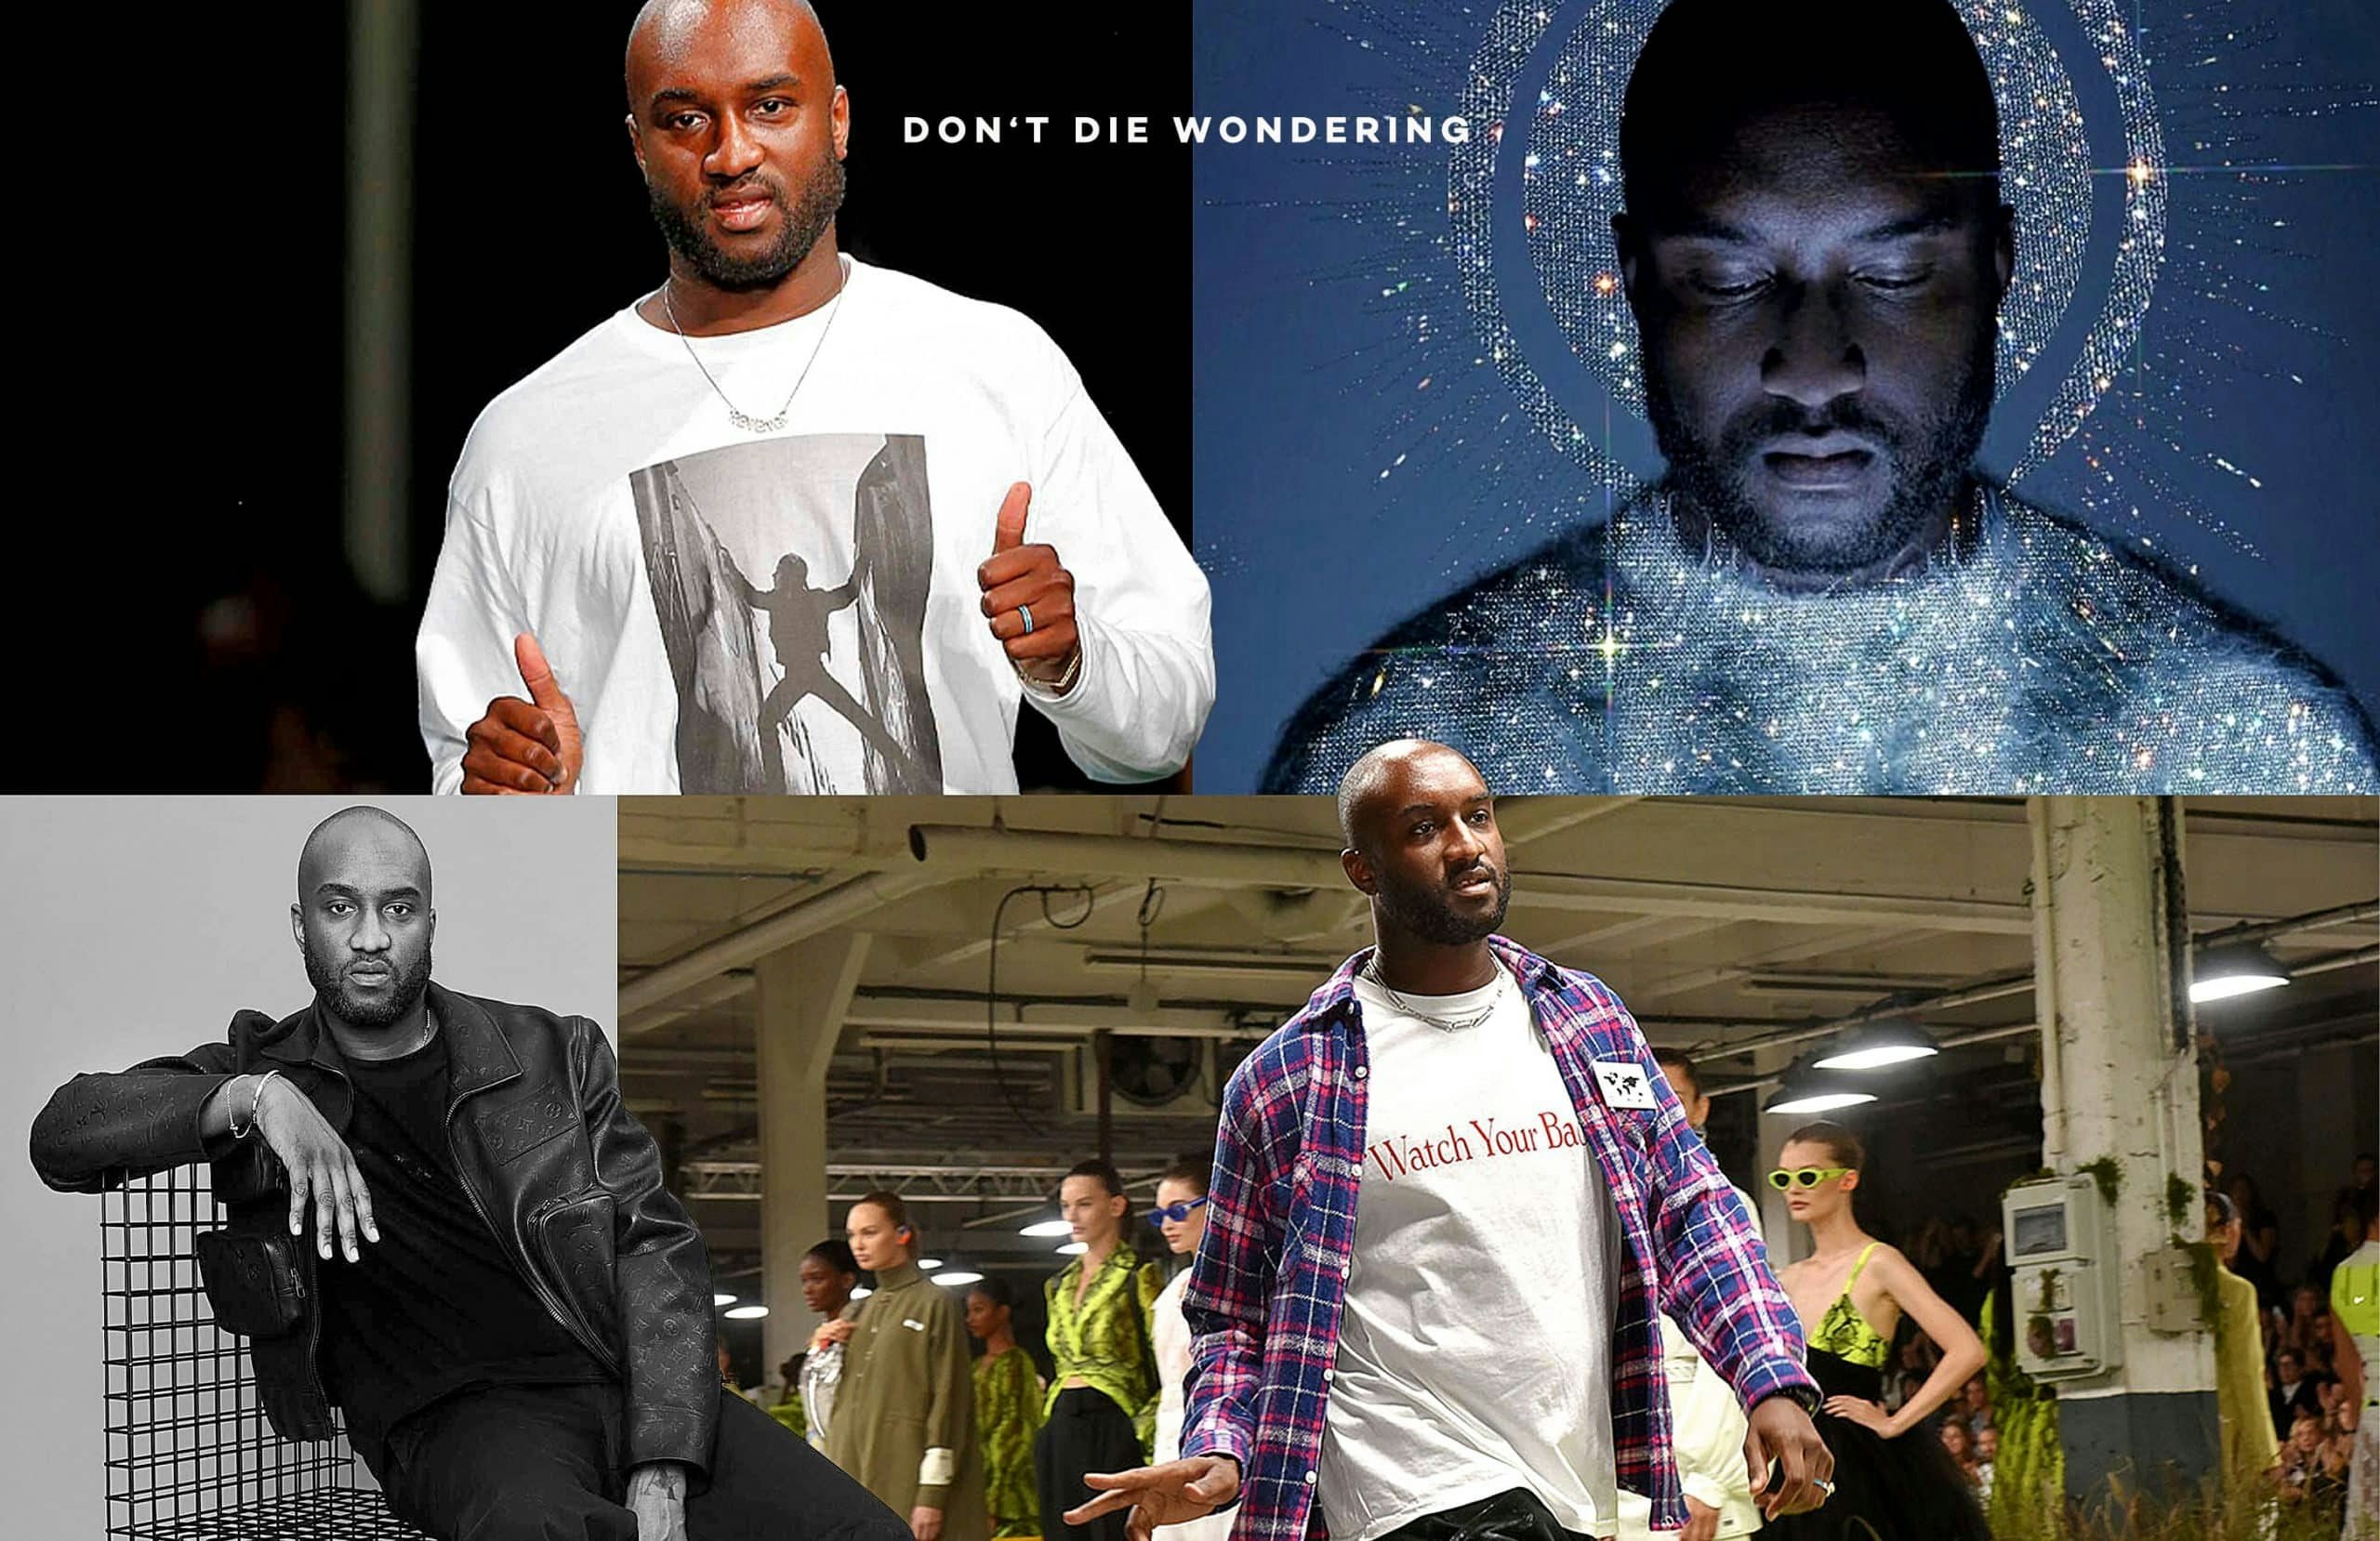 Virgil Abloh Blazed a Fashion Trail. Then He Helped Young Black